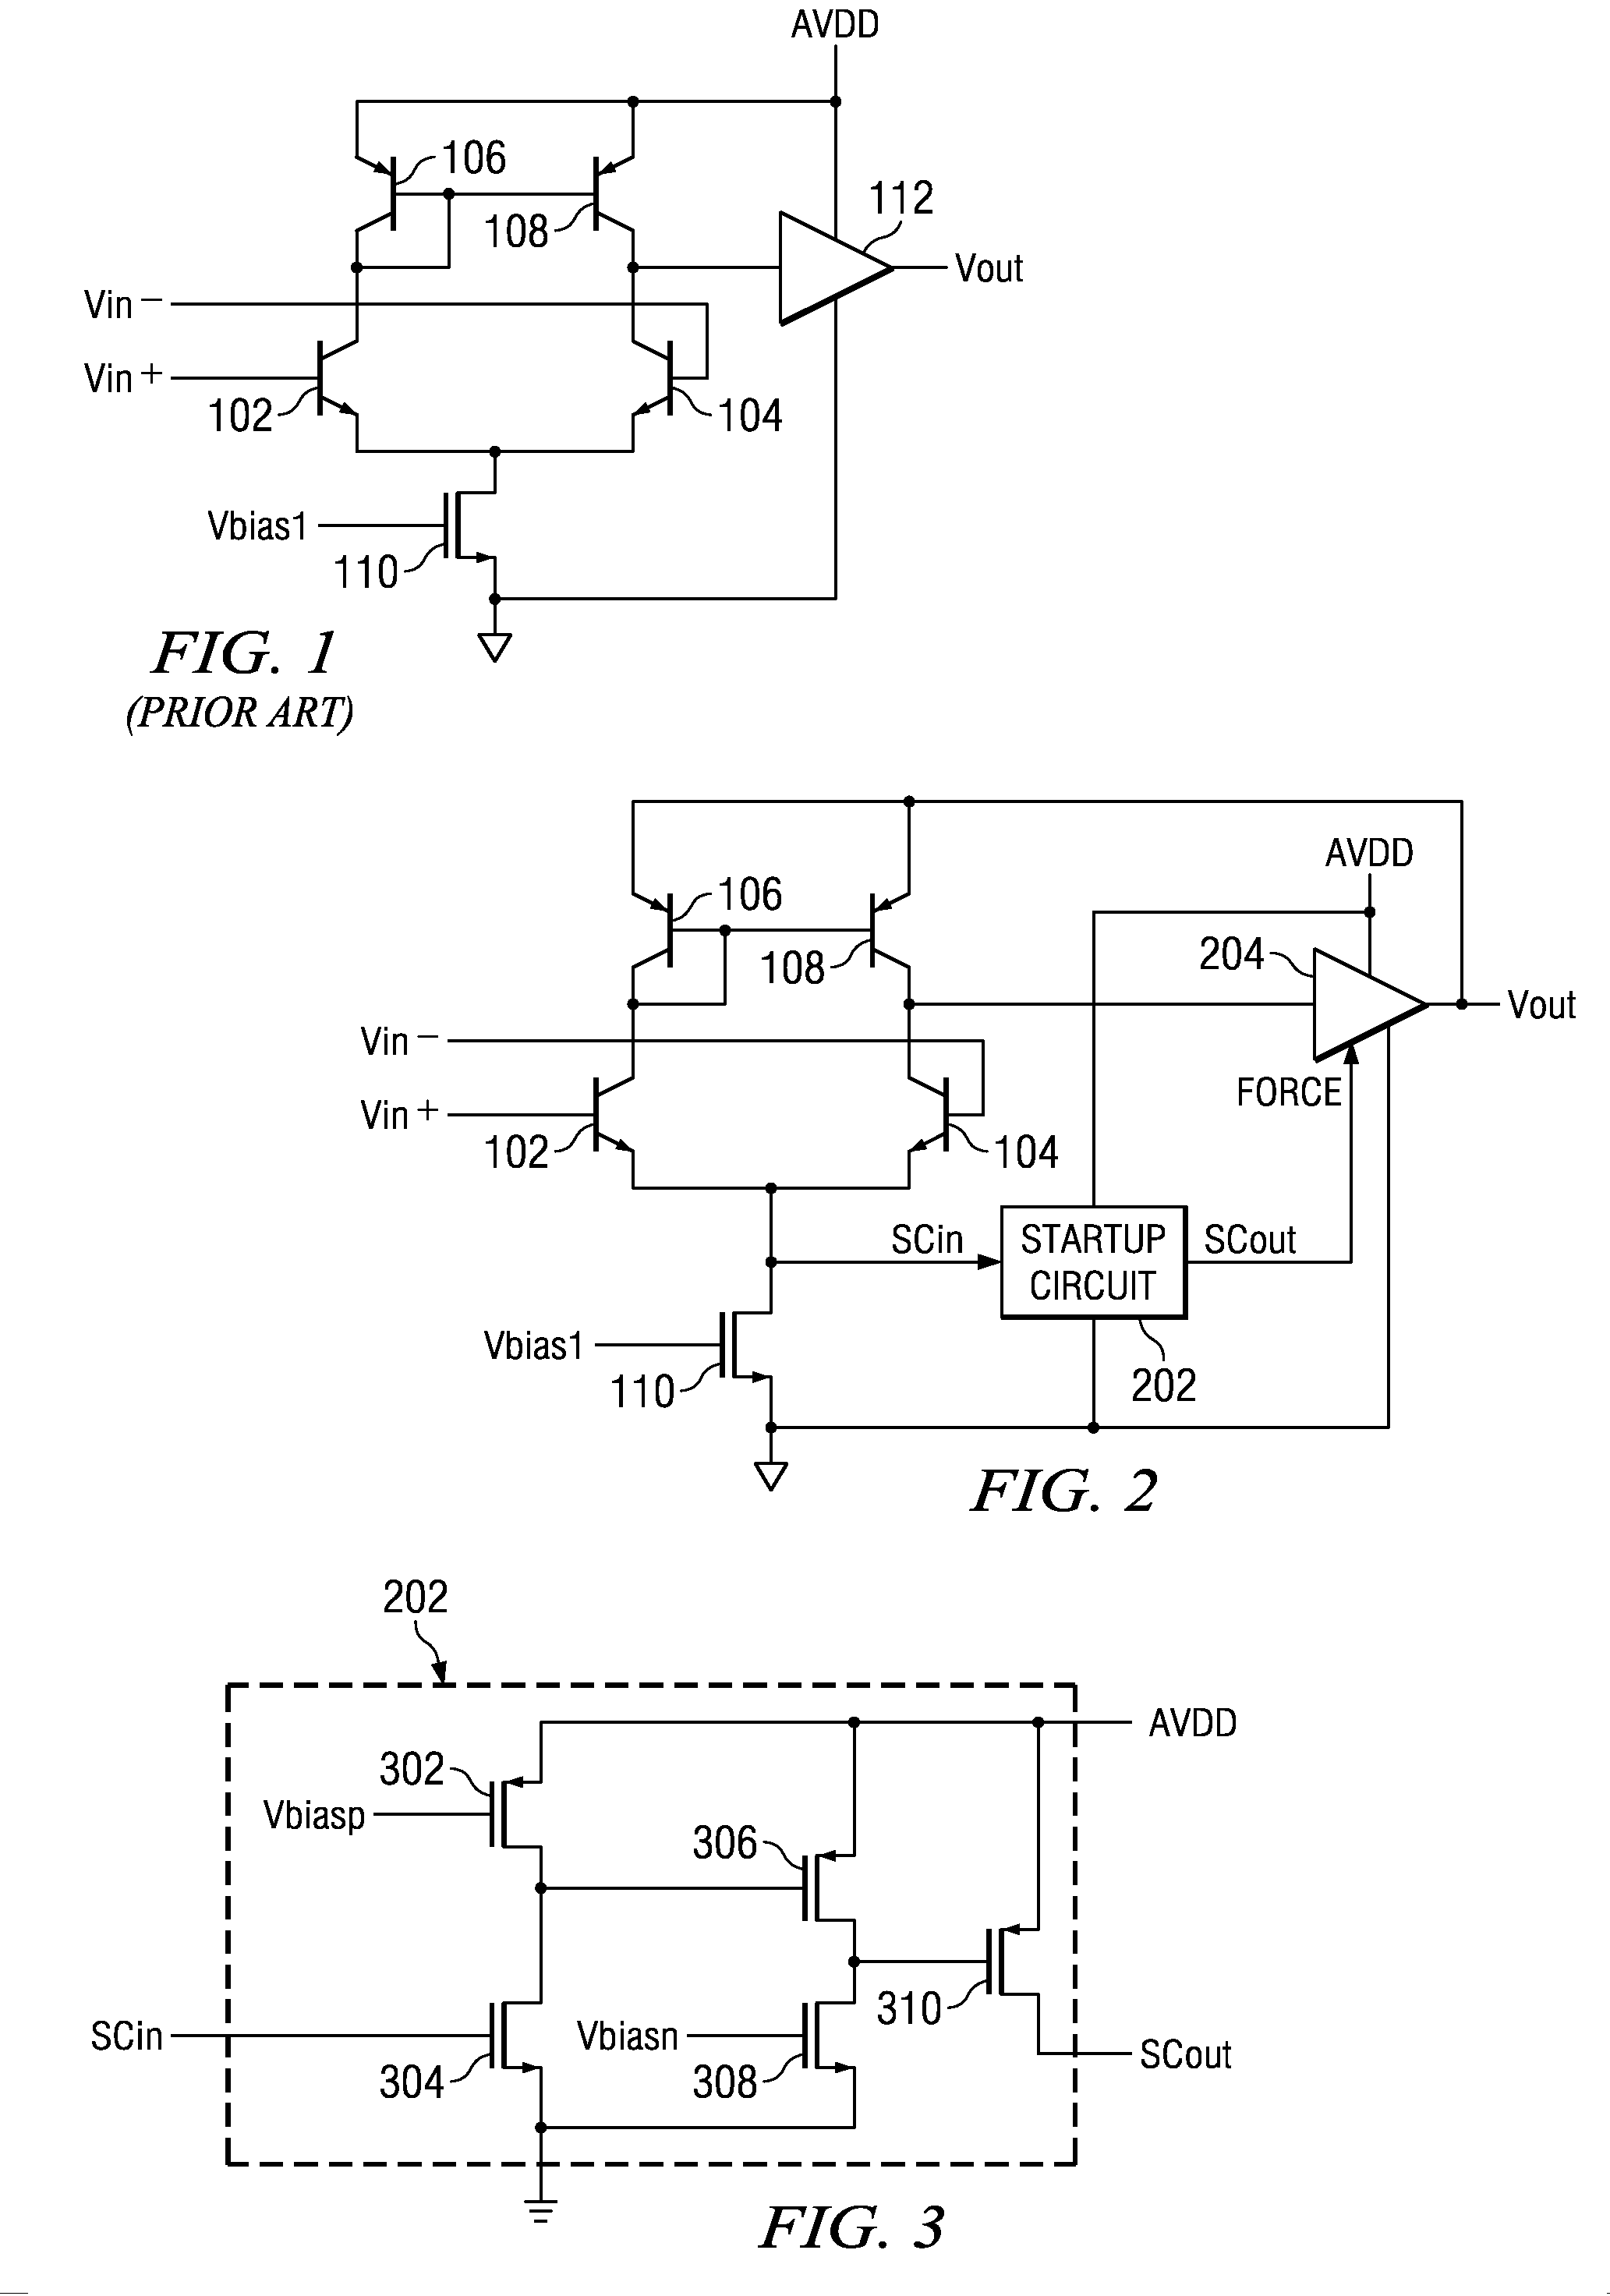 Startup circuit for subregulated amplifier